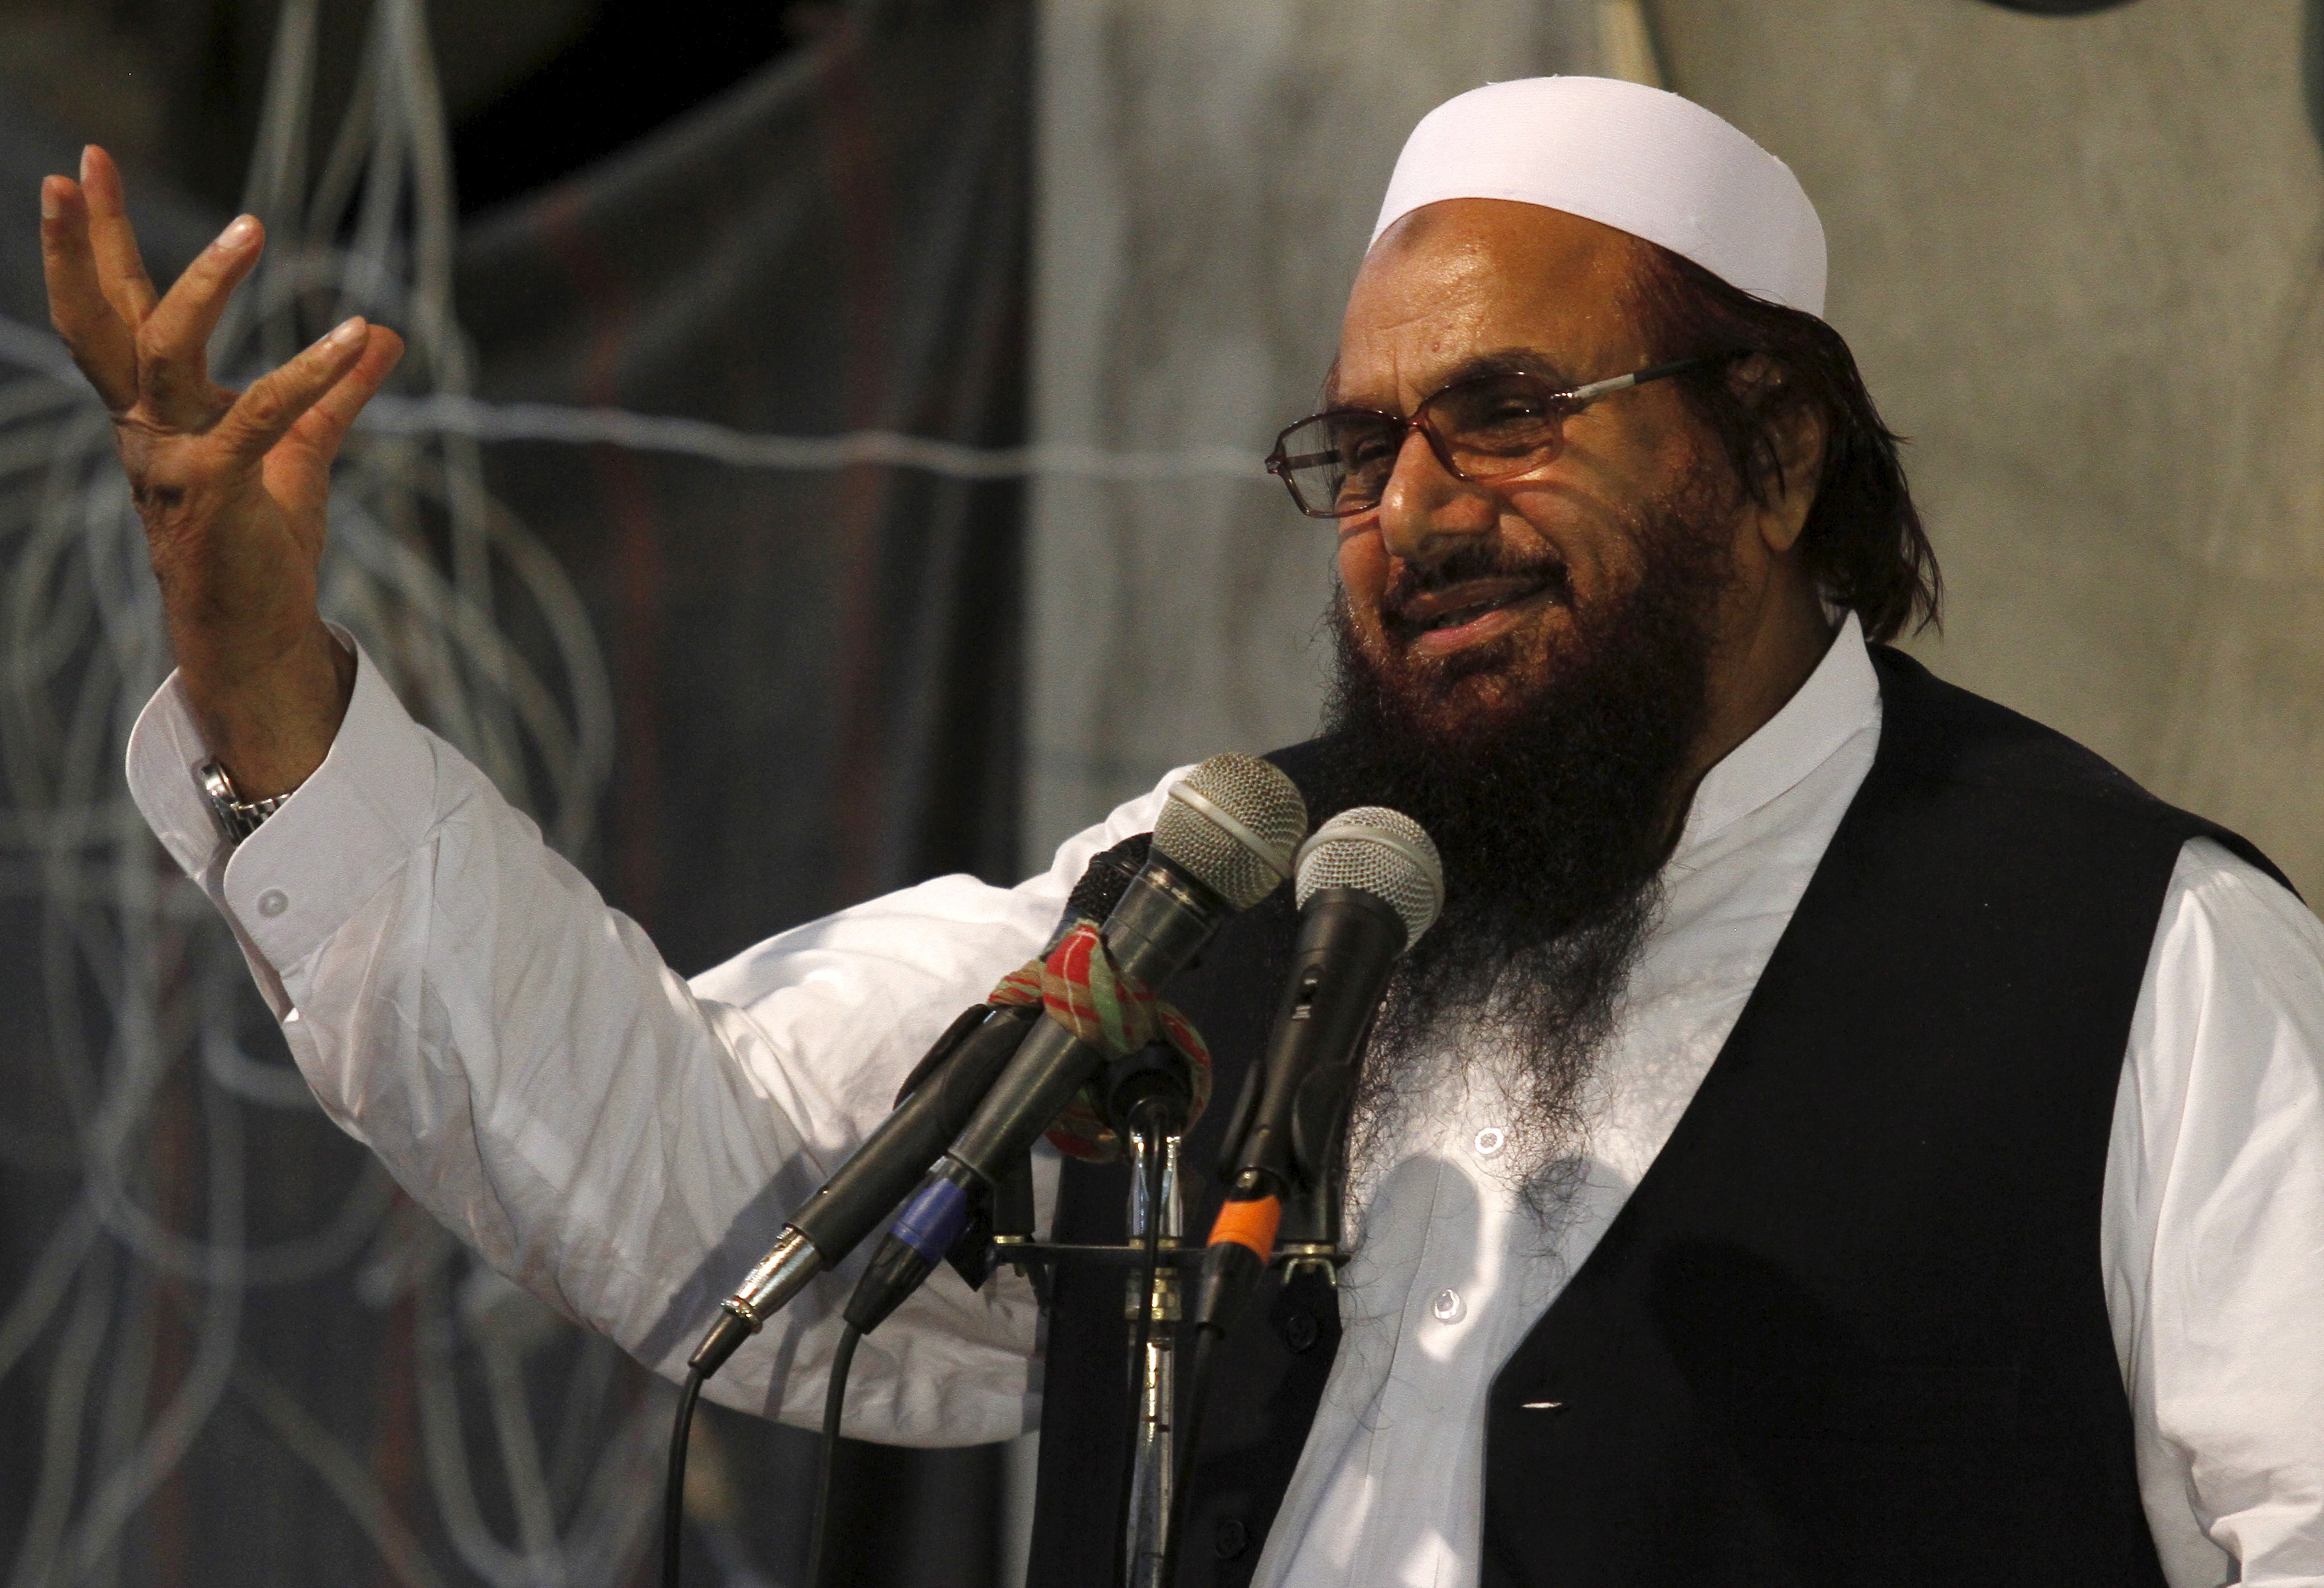 Hafiz Muhammad Saeed, chief of the Jamat-ud-Dawa religious party, addresses the Harmain Sharifain Conference in support of the Saudi Arabian government in Peshawar